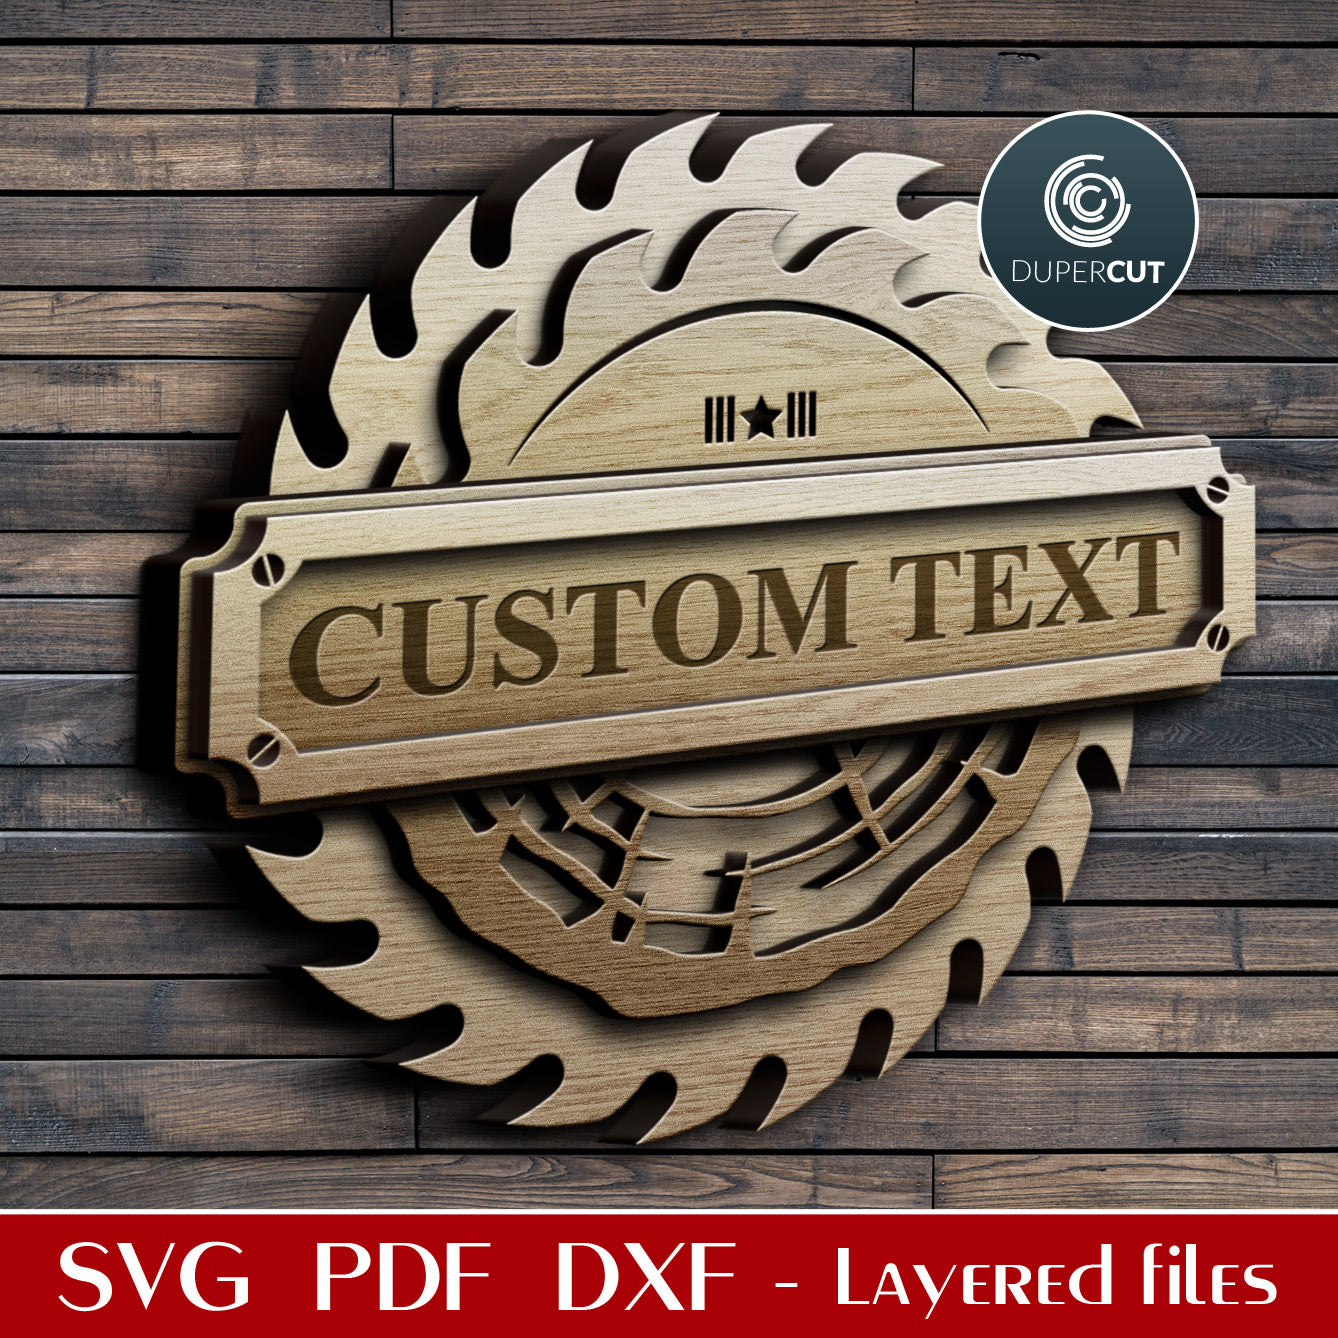 Carpentry woodworking shop DIY personalized  sign - SVG PDF DXF layered cutting files for laser and digital machines, Glowforge, Silhouette Cameo, Cricut, CNC plasma machines